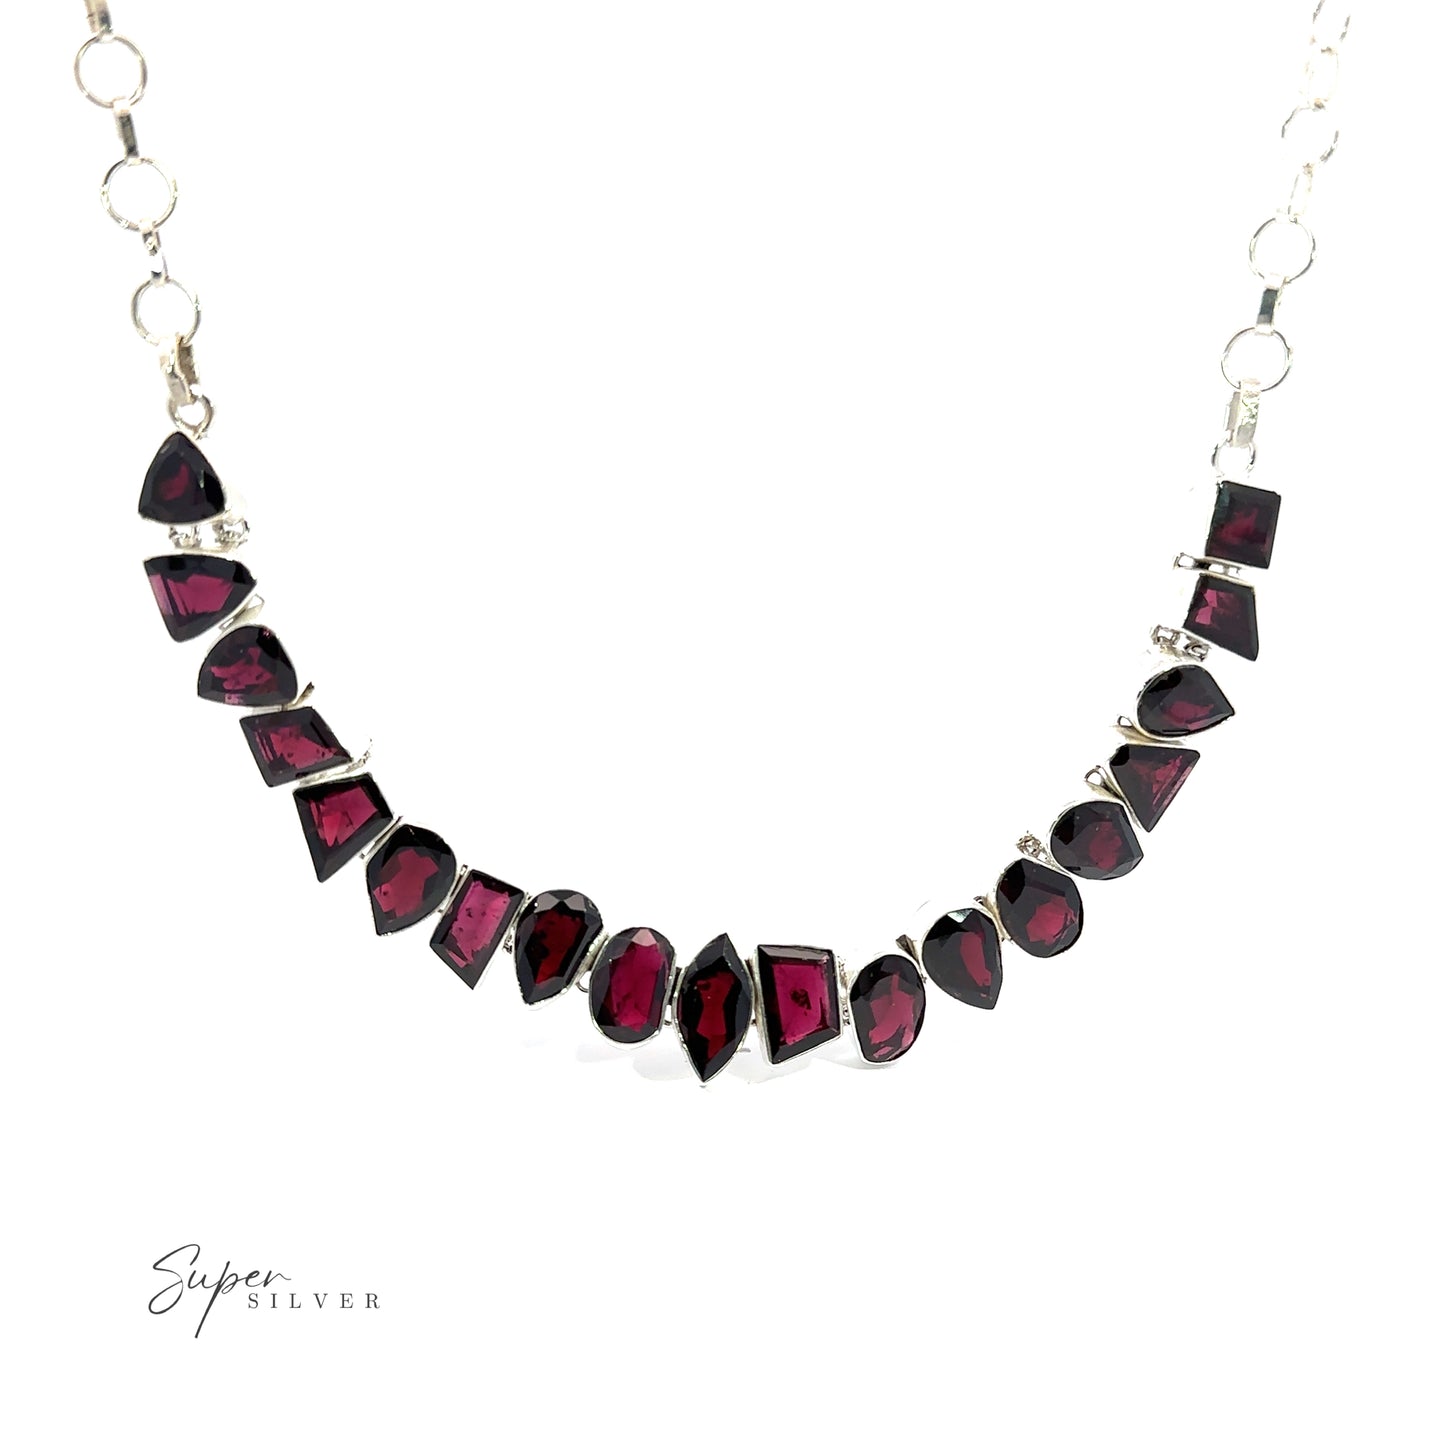 
                  
                    Statement Gemstone Necklace with alternating garnet and red gemstones in various shapes, featuring a chain with circular links. "Super Silver" text is visible in the bottom left corner.
                  
                